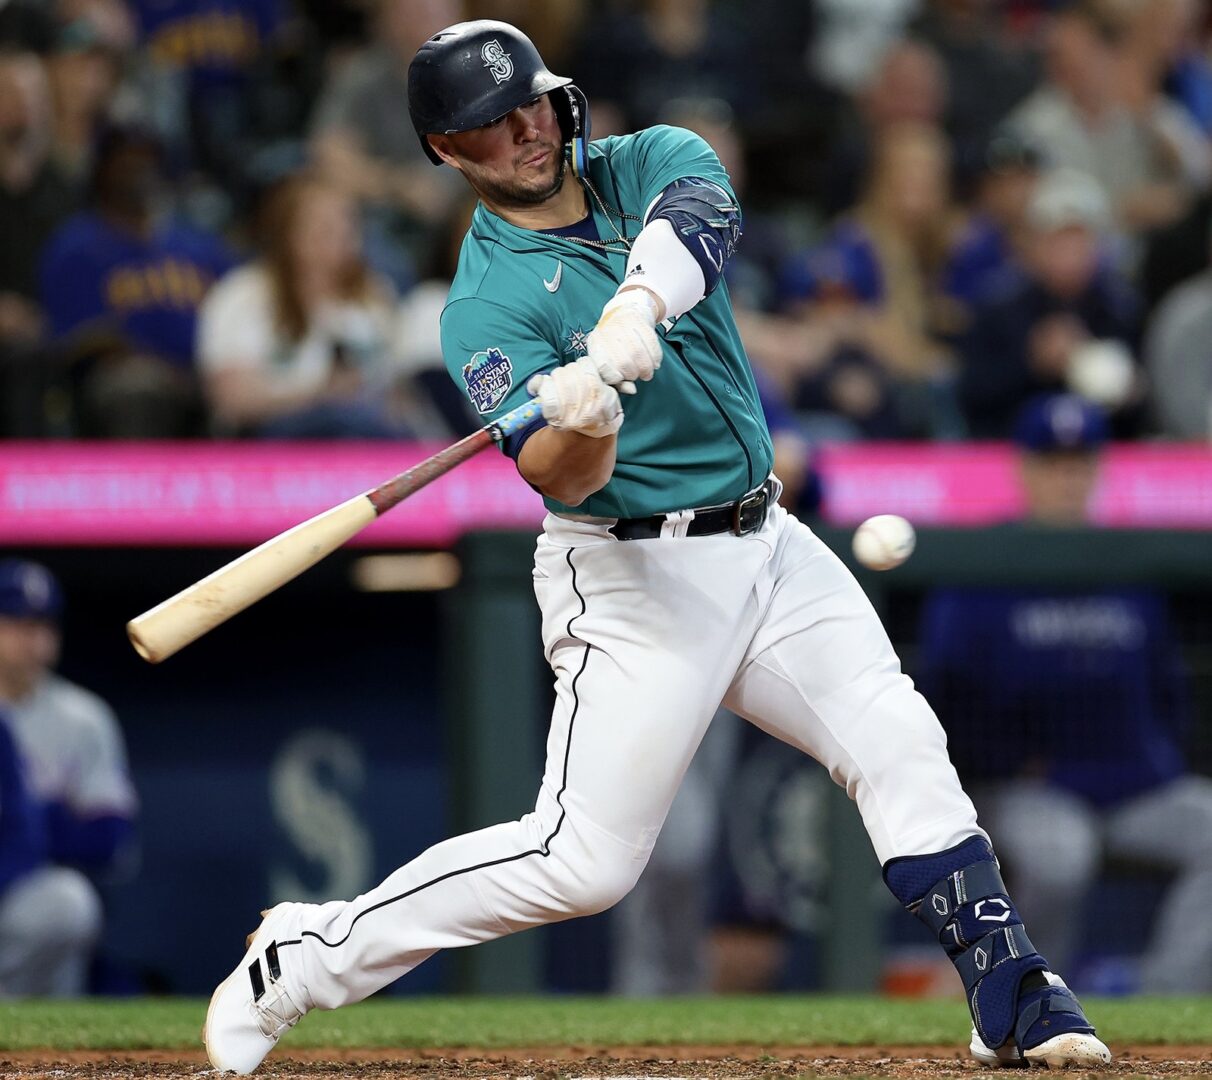 Mariners wrap up season with 1-0 win against Rangers